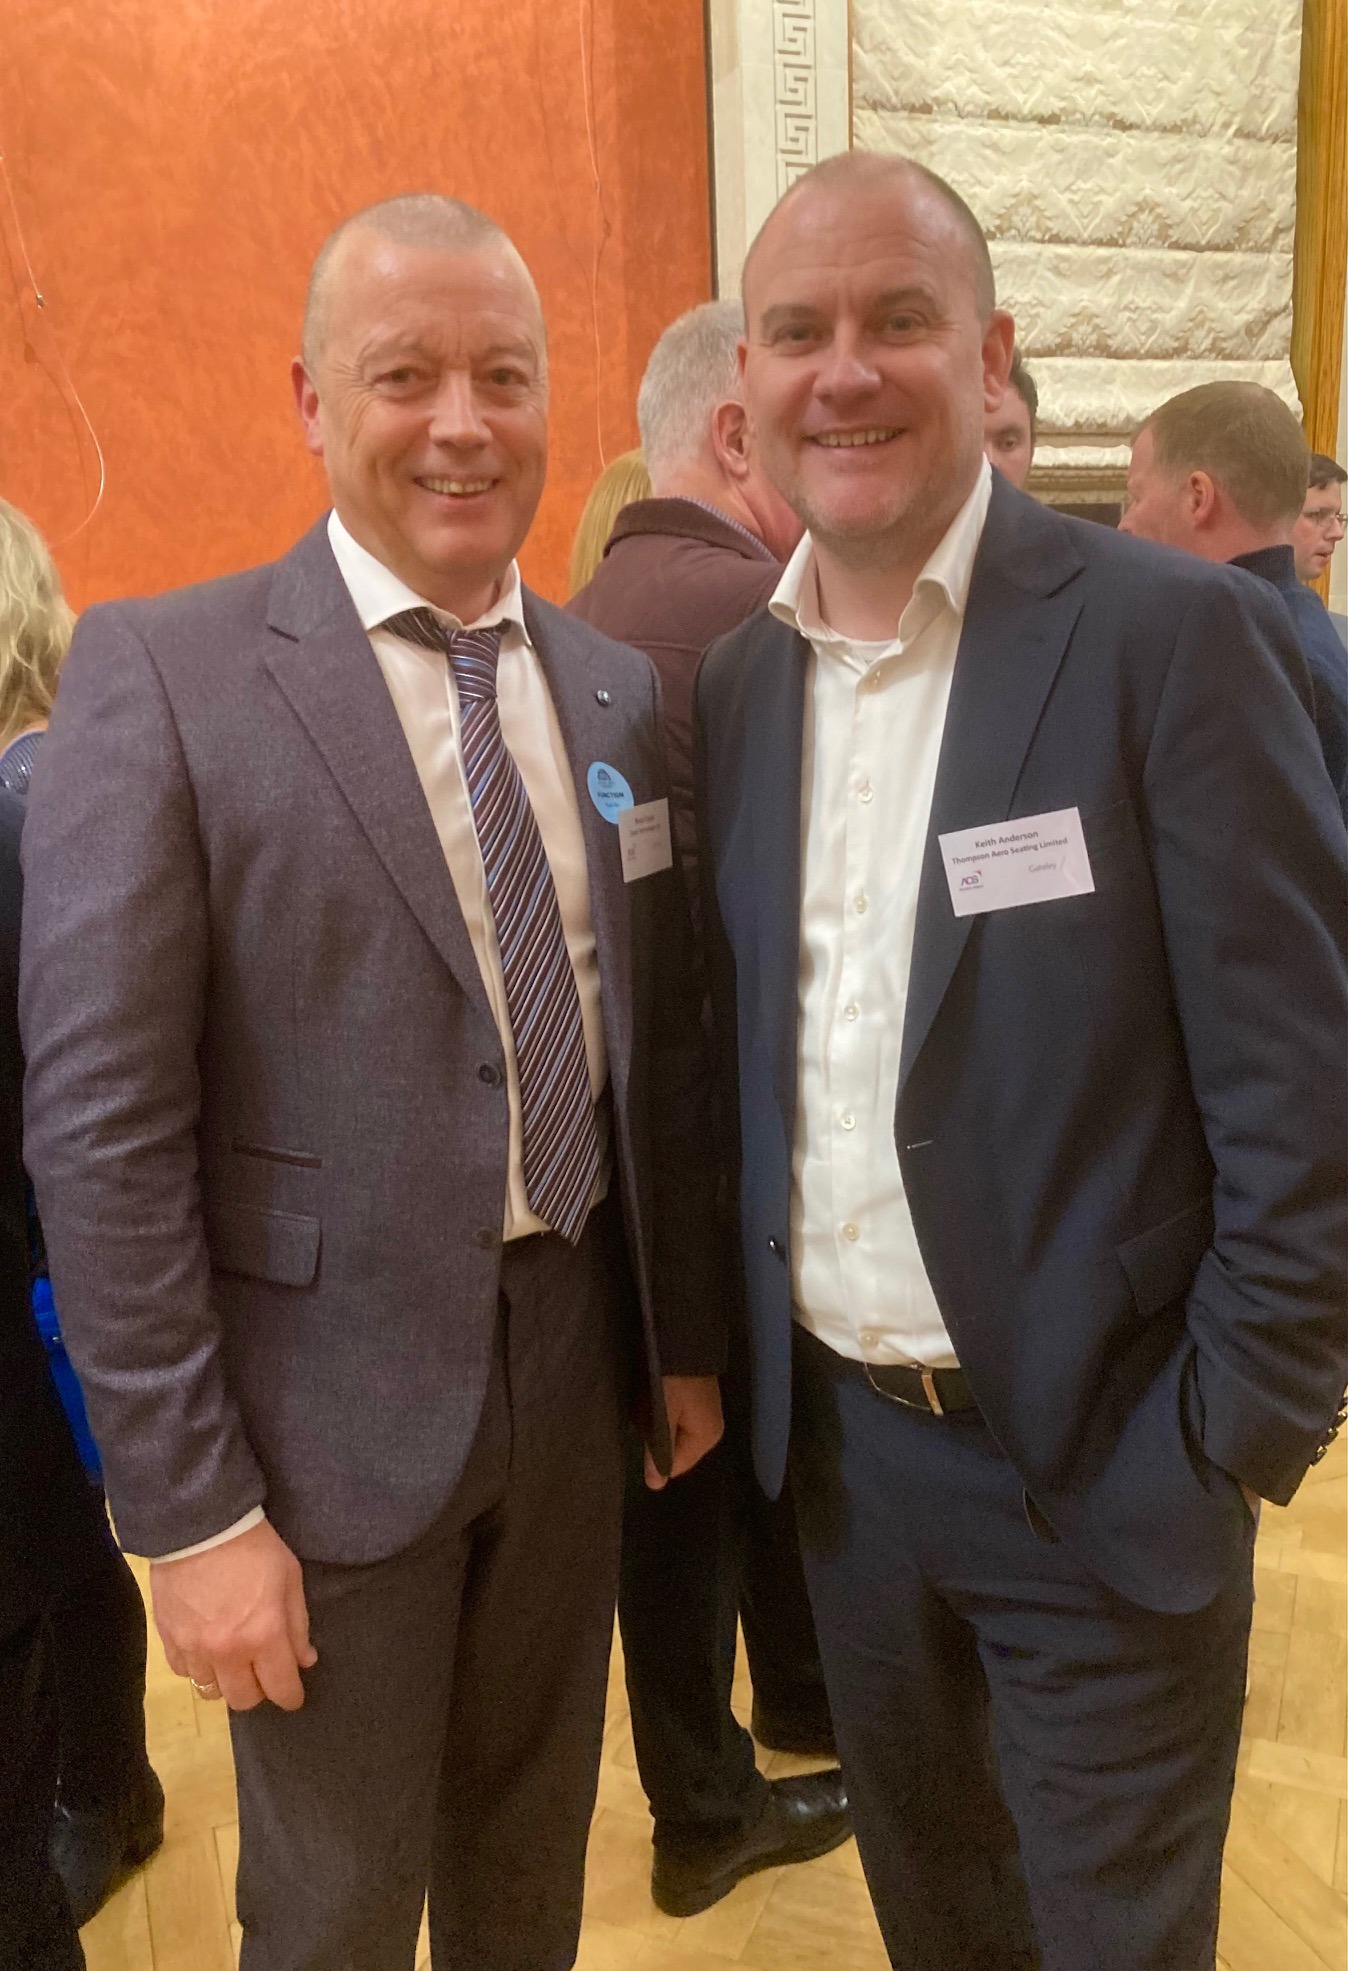 COPAS attends ADS Group NI Members Reception at Stormont, Belfast